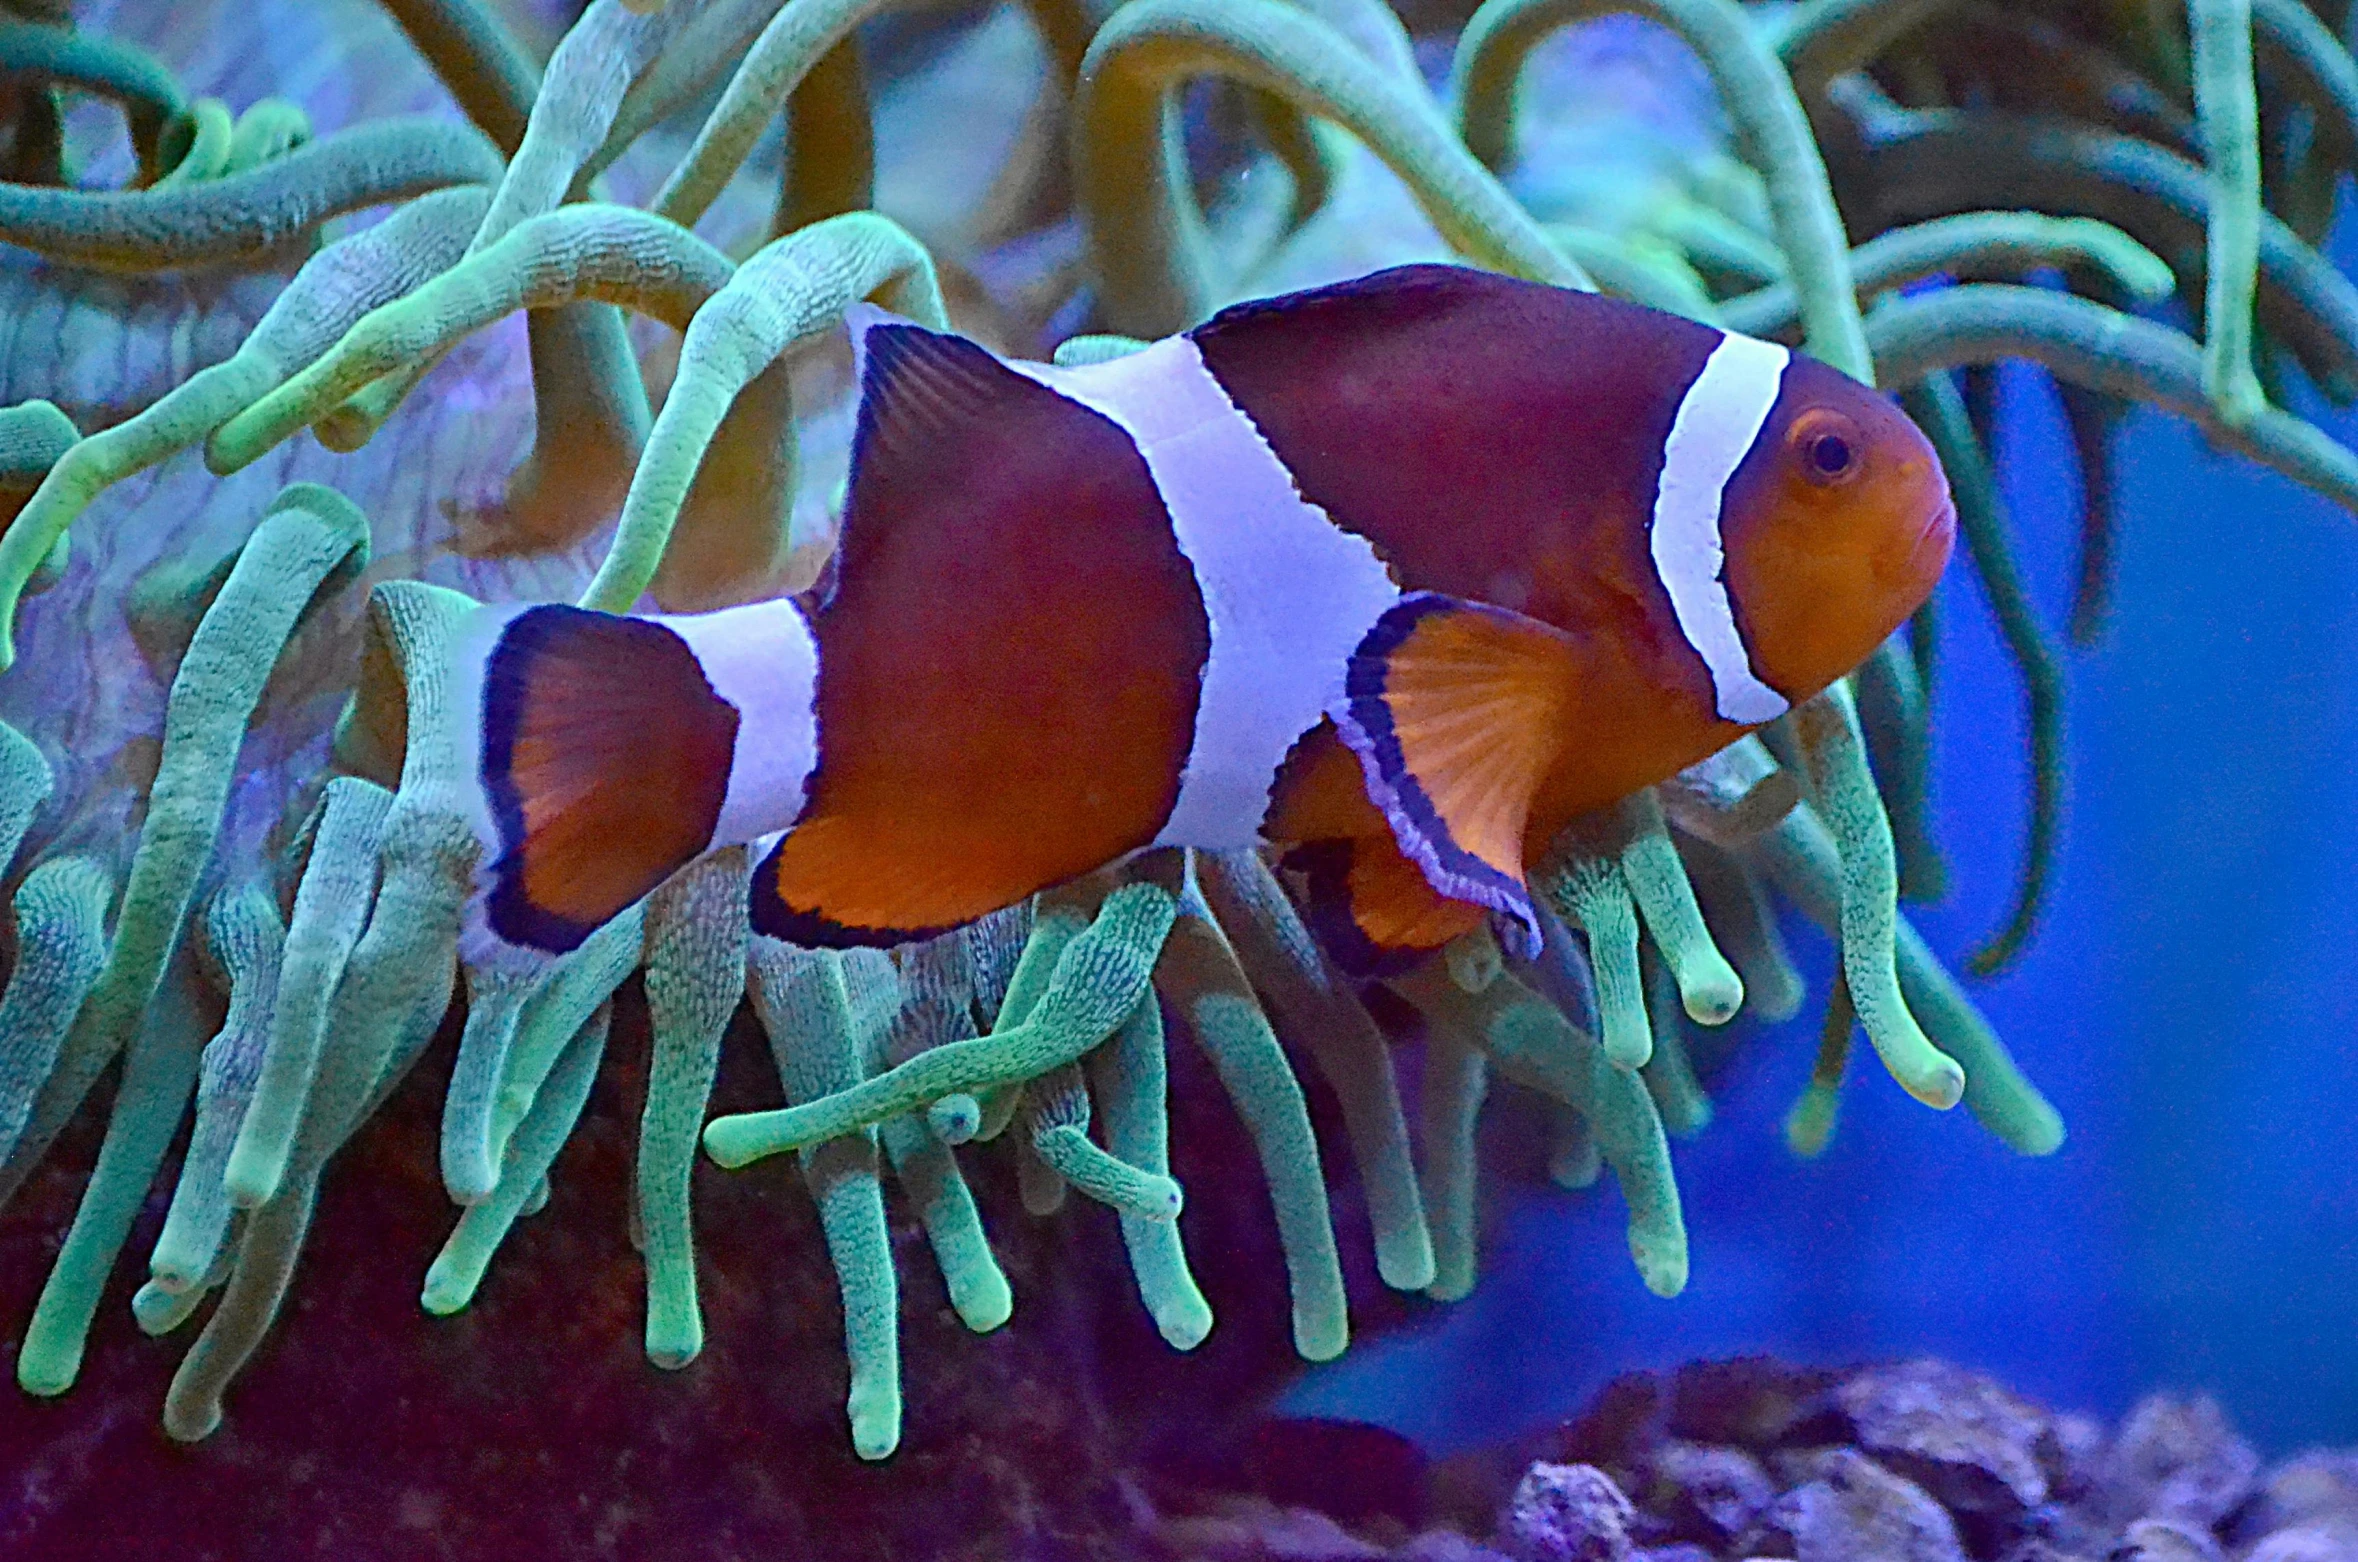 a close up of a clown fish in an aquarium, by Bernie D’Andrea, fine art, some purple and orange, taken in the early 2020s, slide show, extremely polished